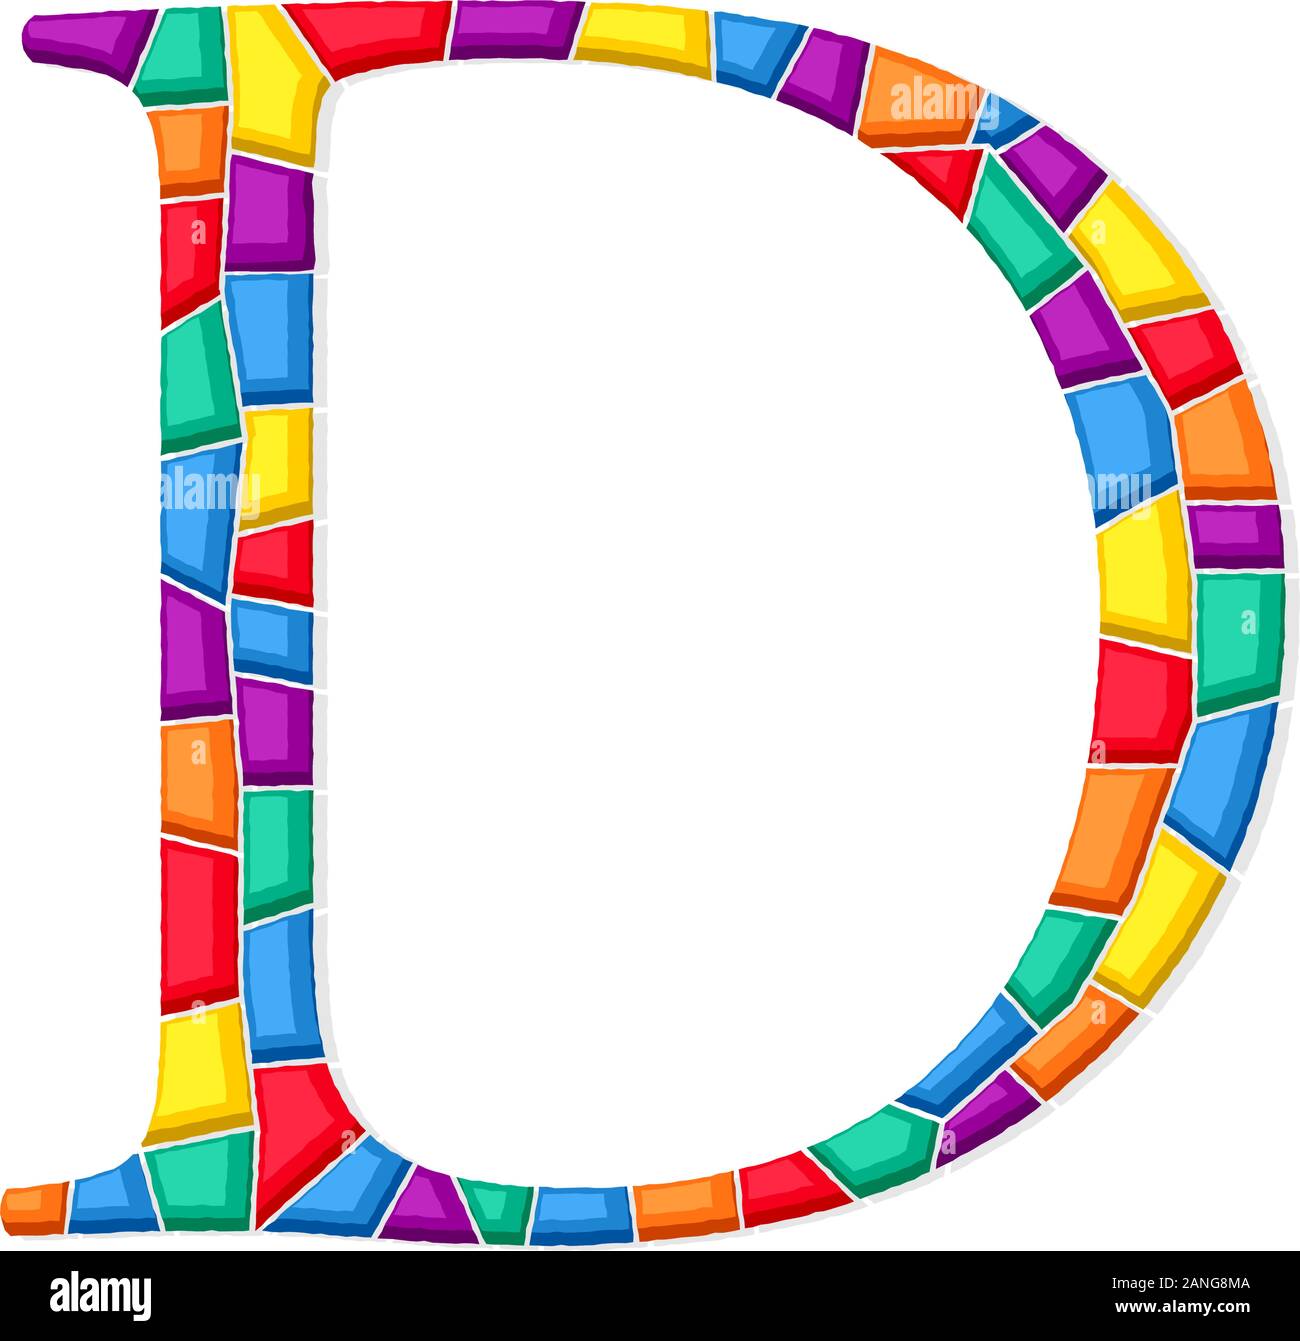 Letter D vector mosaic tiles composition in colors over white ...